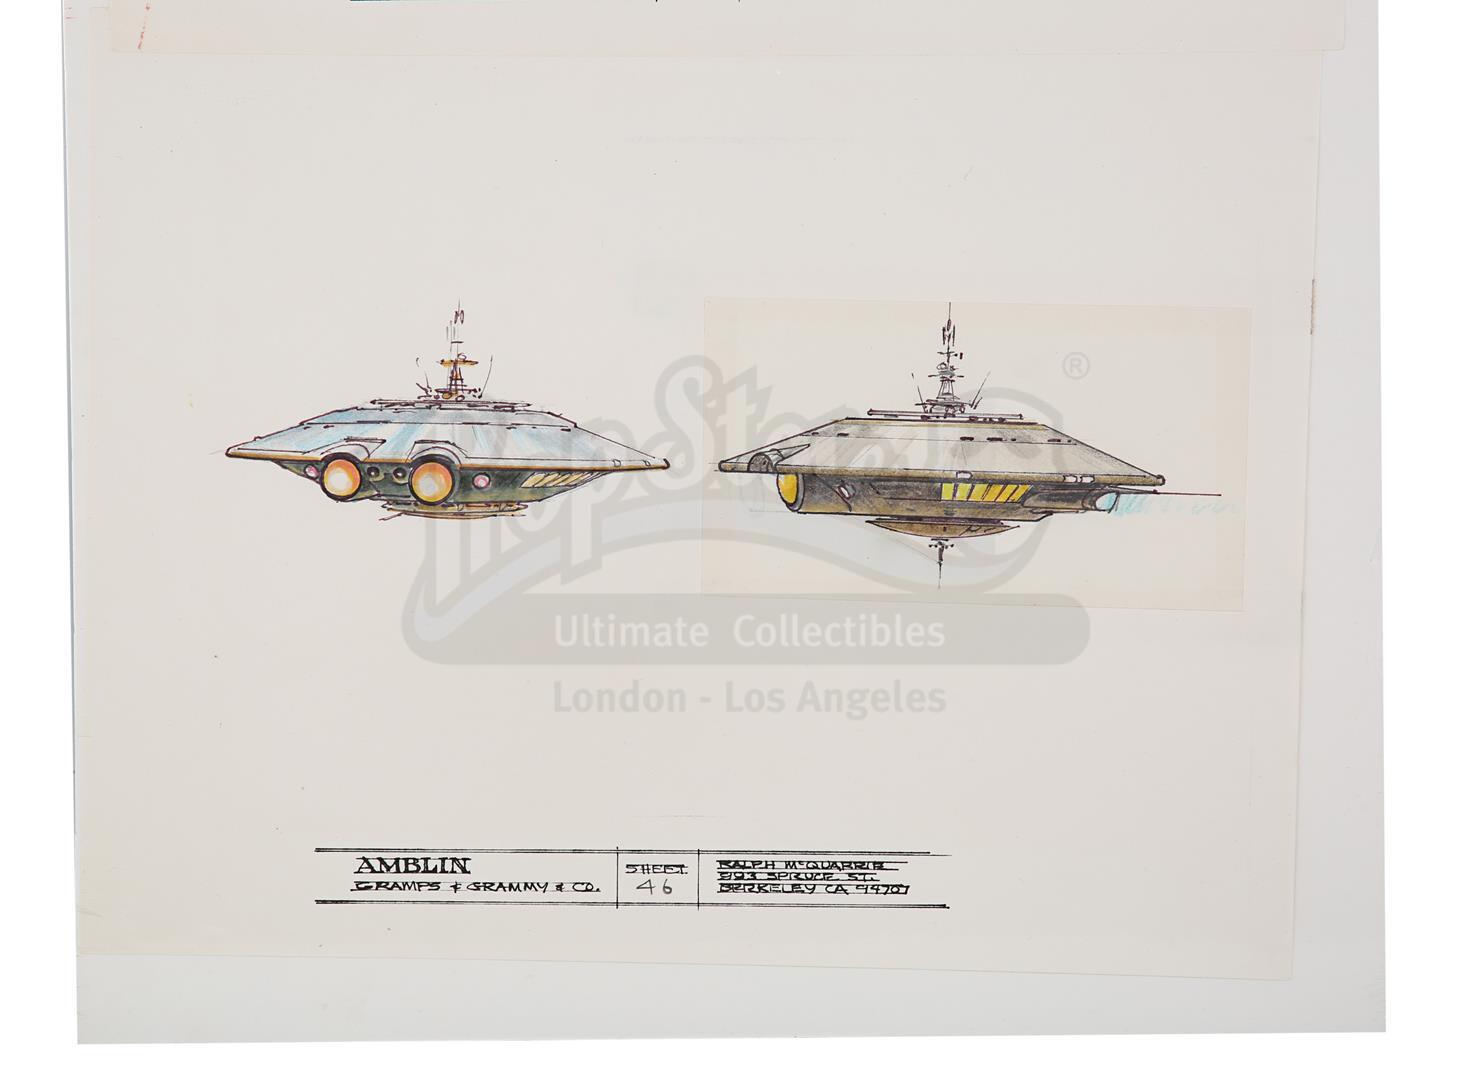 *BATTERIES NOT INCLUDED (1987) - Pair of Hand-drawn Ralph McQuarrie "Pop" Spaceship Illustration She - Image 3 of 6